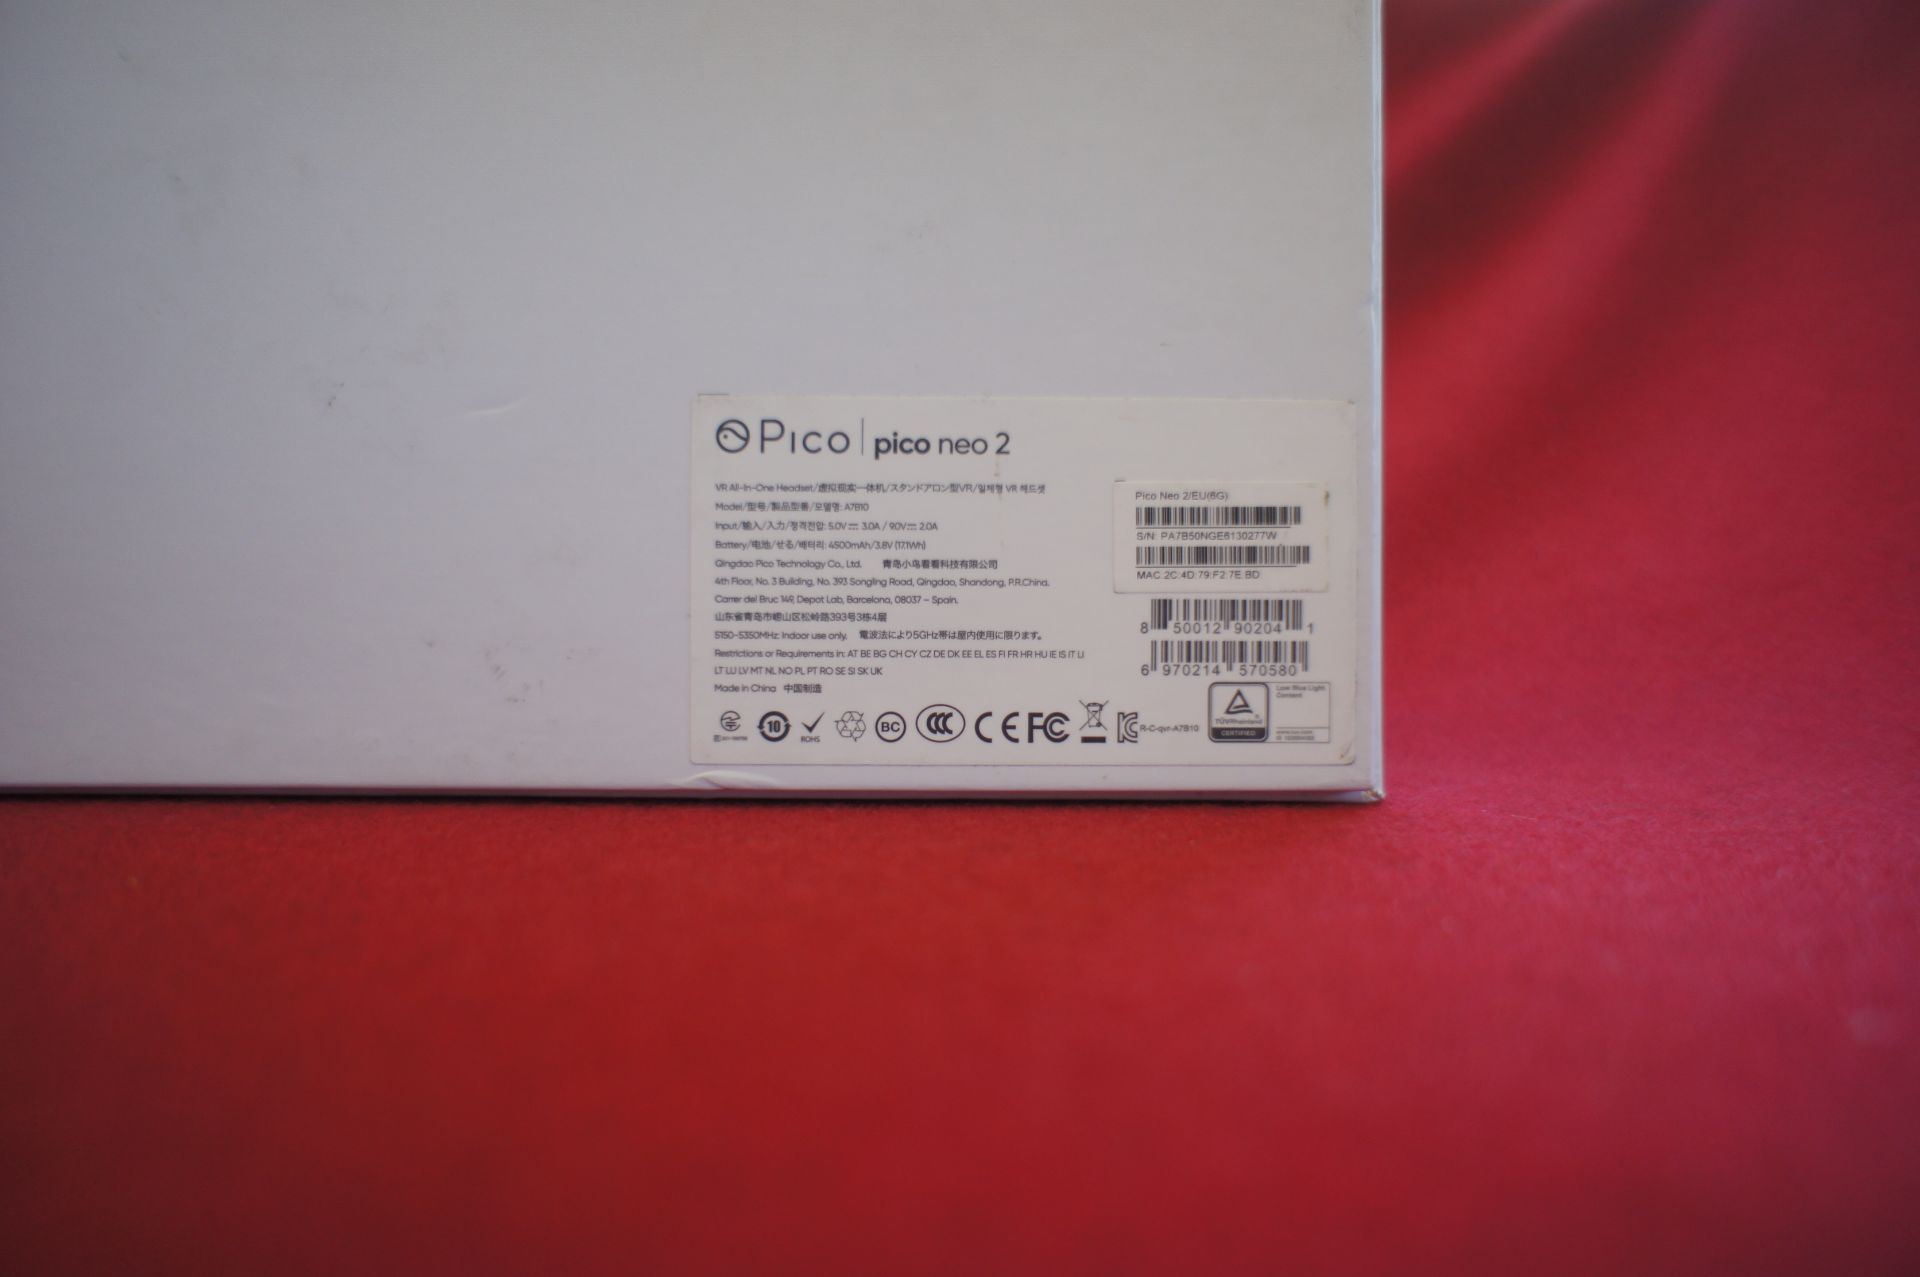 Pico Neo 2 VR headset, Asset Number D9, S/N PA7B50 - Image 2 of 3